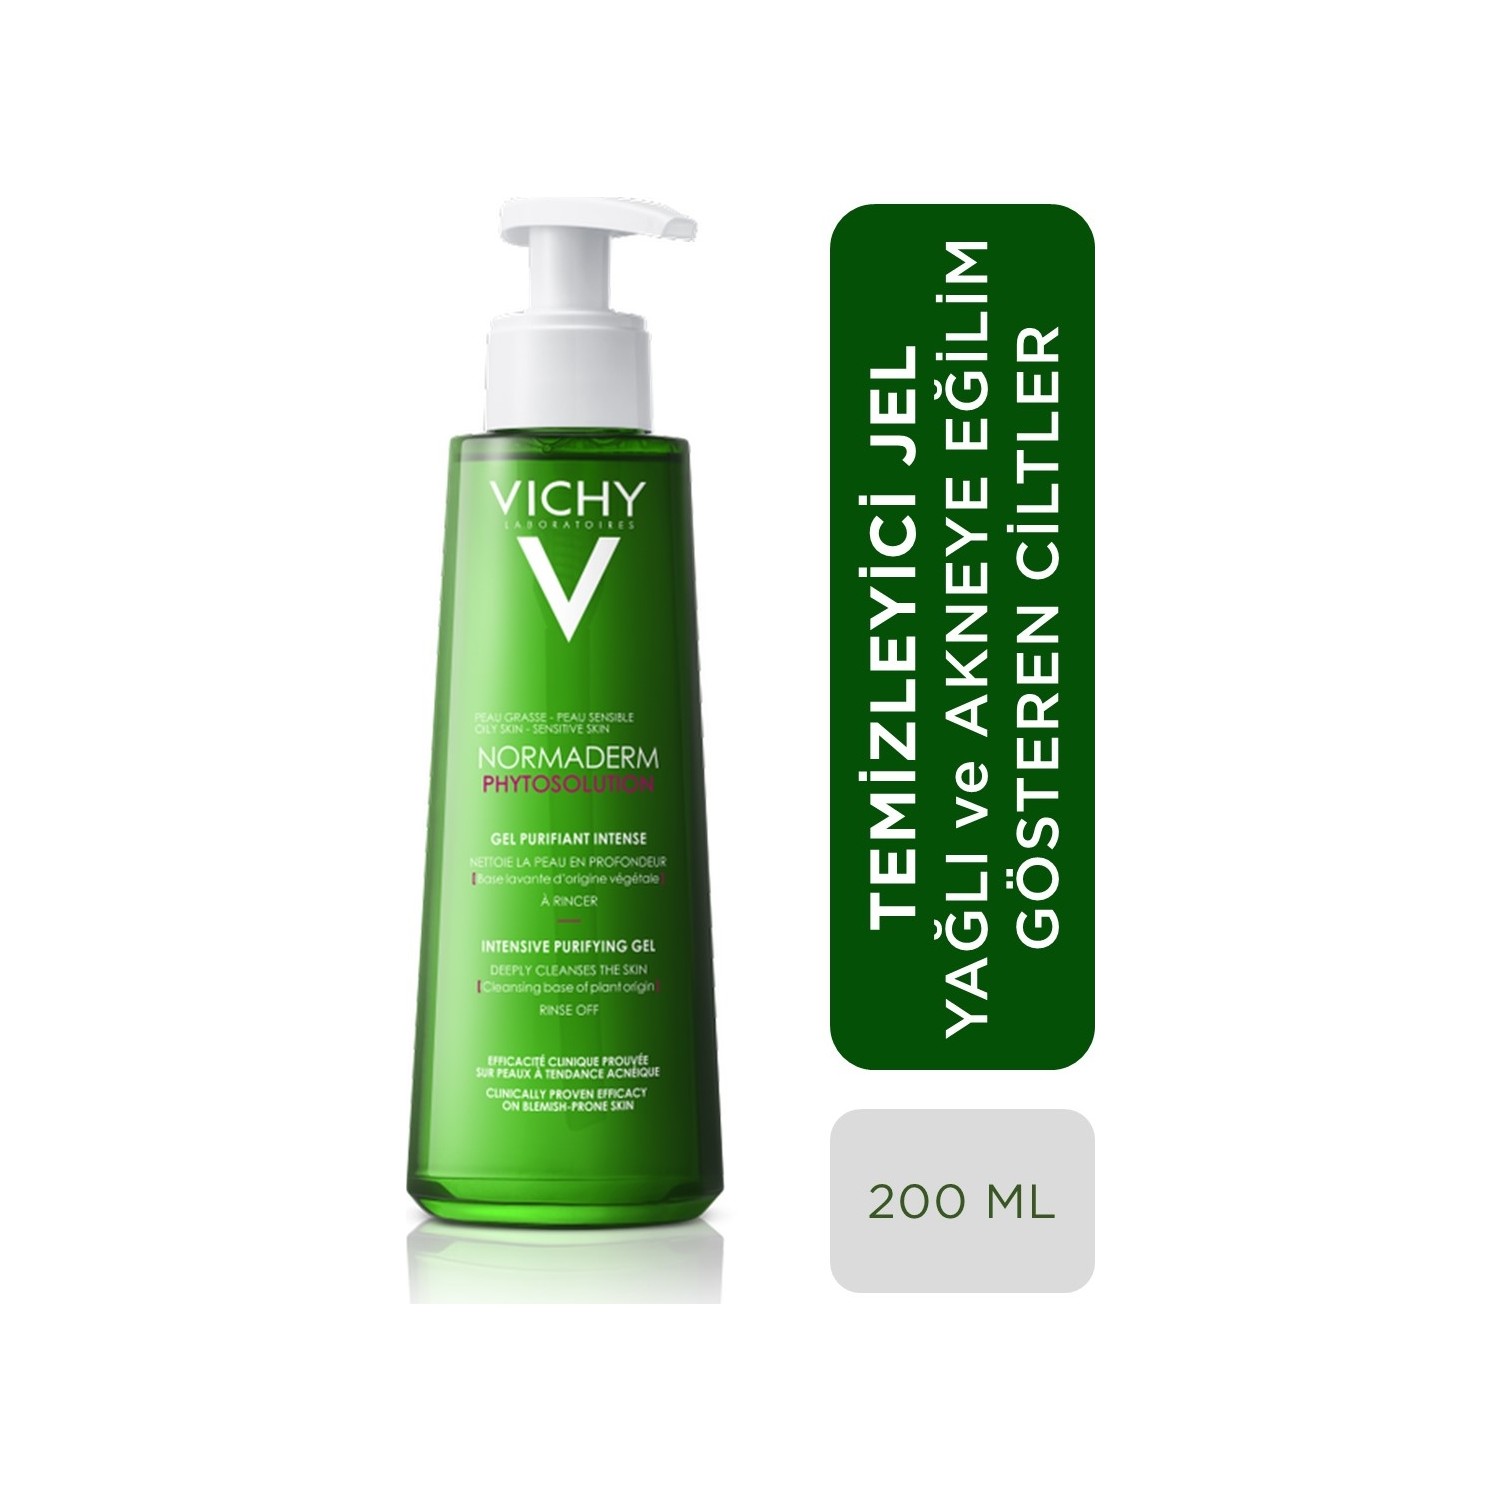 Vichy Normaderm. Виши Нормадерм phytosolution. Vichy гель Normaderm phytosolution Intensive Purifying Gel, 200 мл. Vichy Normaderm phytosolution гель пробник. Vichy normaderm phytosolution intensive purifying gel